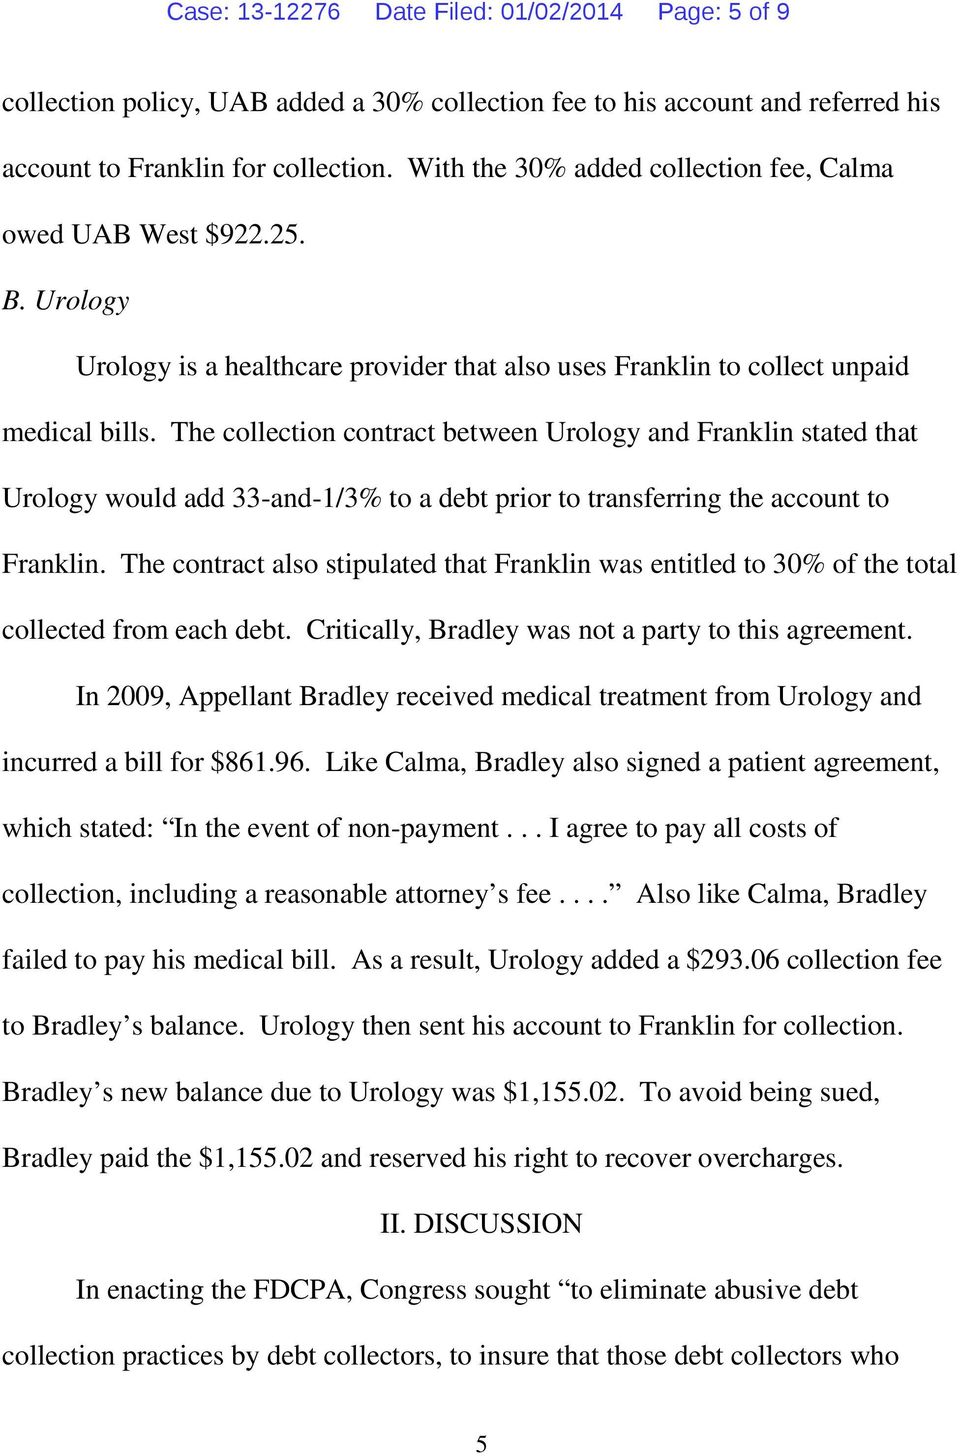 The collection contract between Urology and Franklin stated that Urology would add 33-and-1/3% to a debt prior to transferring the account to Franklin.